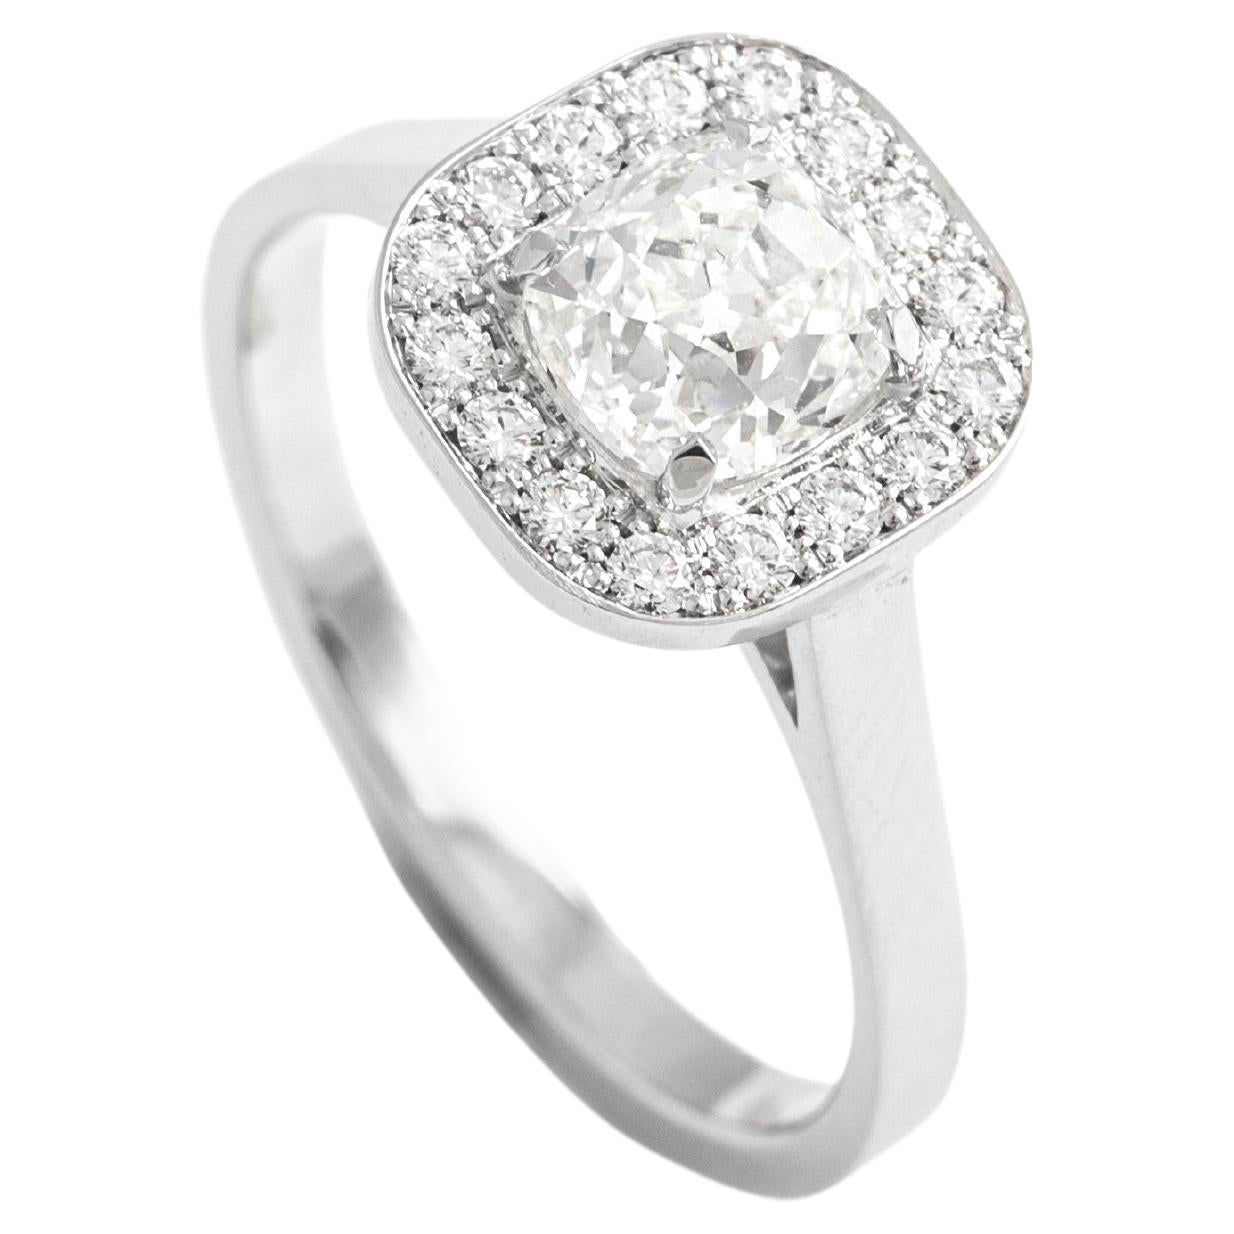 1.04 Carat Diamond Solitaire Ring For Sale